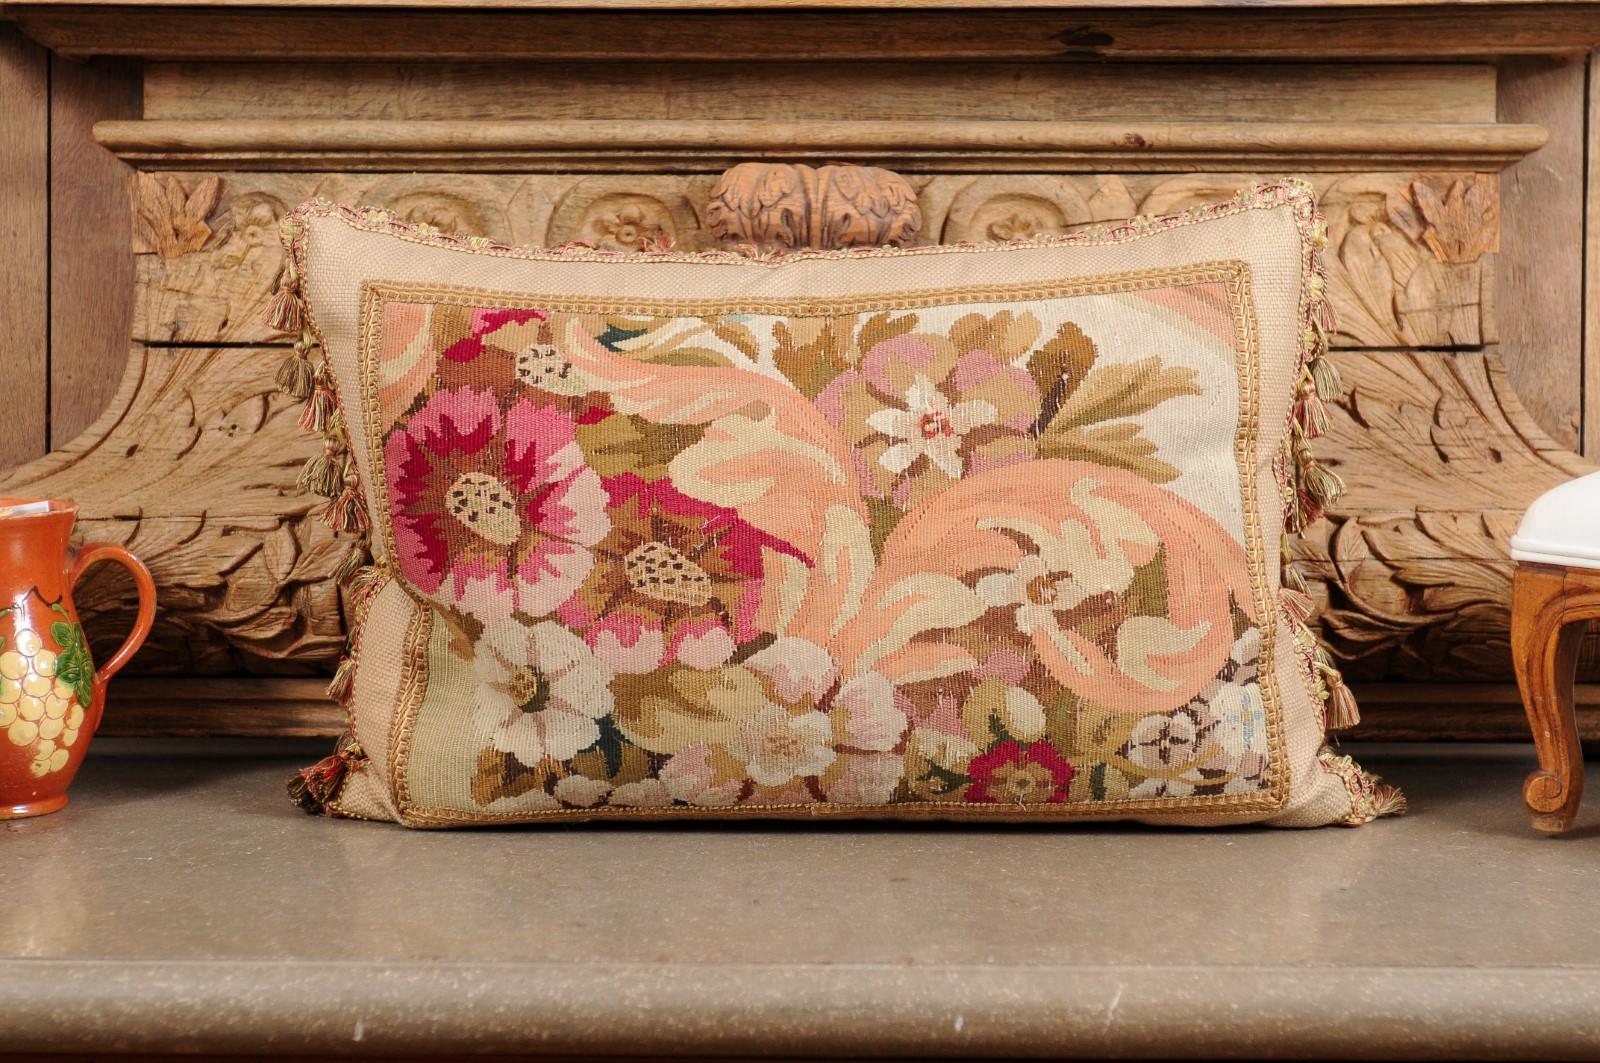 A pillow made from 19th century French tapestry, with floral decor and tassels. Crafted from a tapestry woven during the 19th century, this horizontal pillow is adorned with an abundant decor of pink and white flowers accented with green, brown and